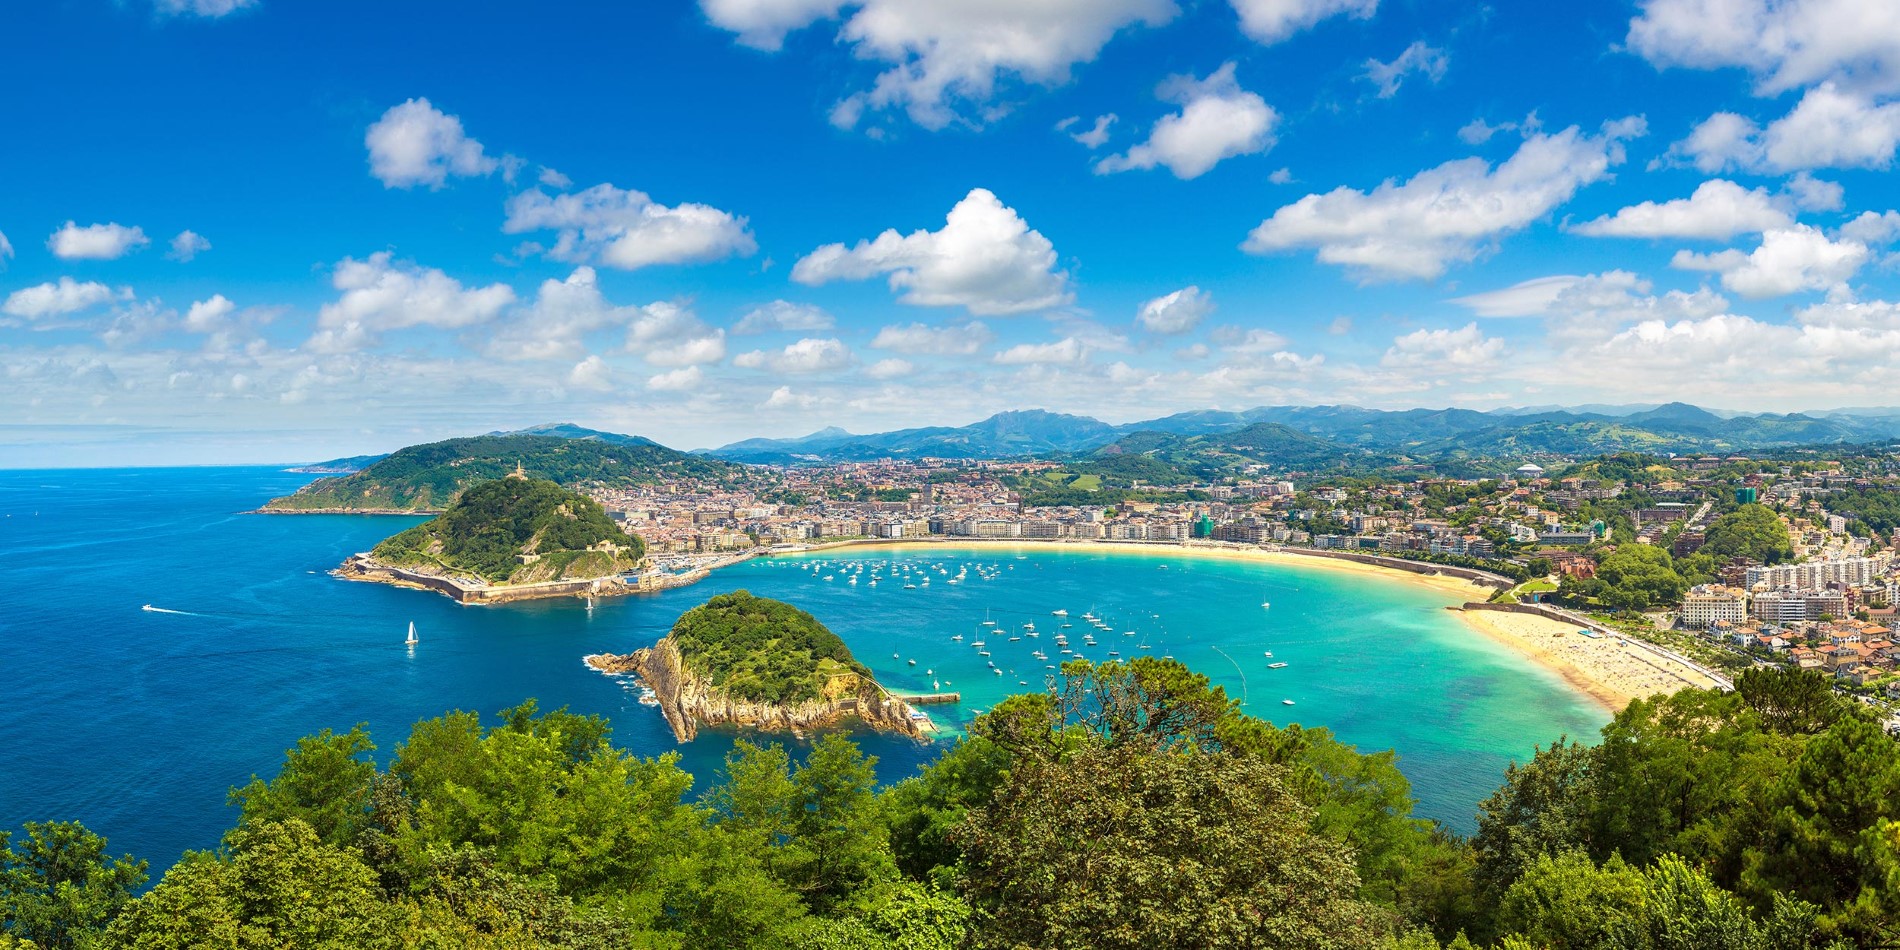 Beach Playa de la Concha in San Sebastian, Spain, from above. A bay with sandy beach and turquoise water.